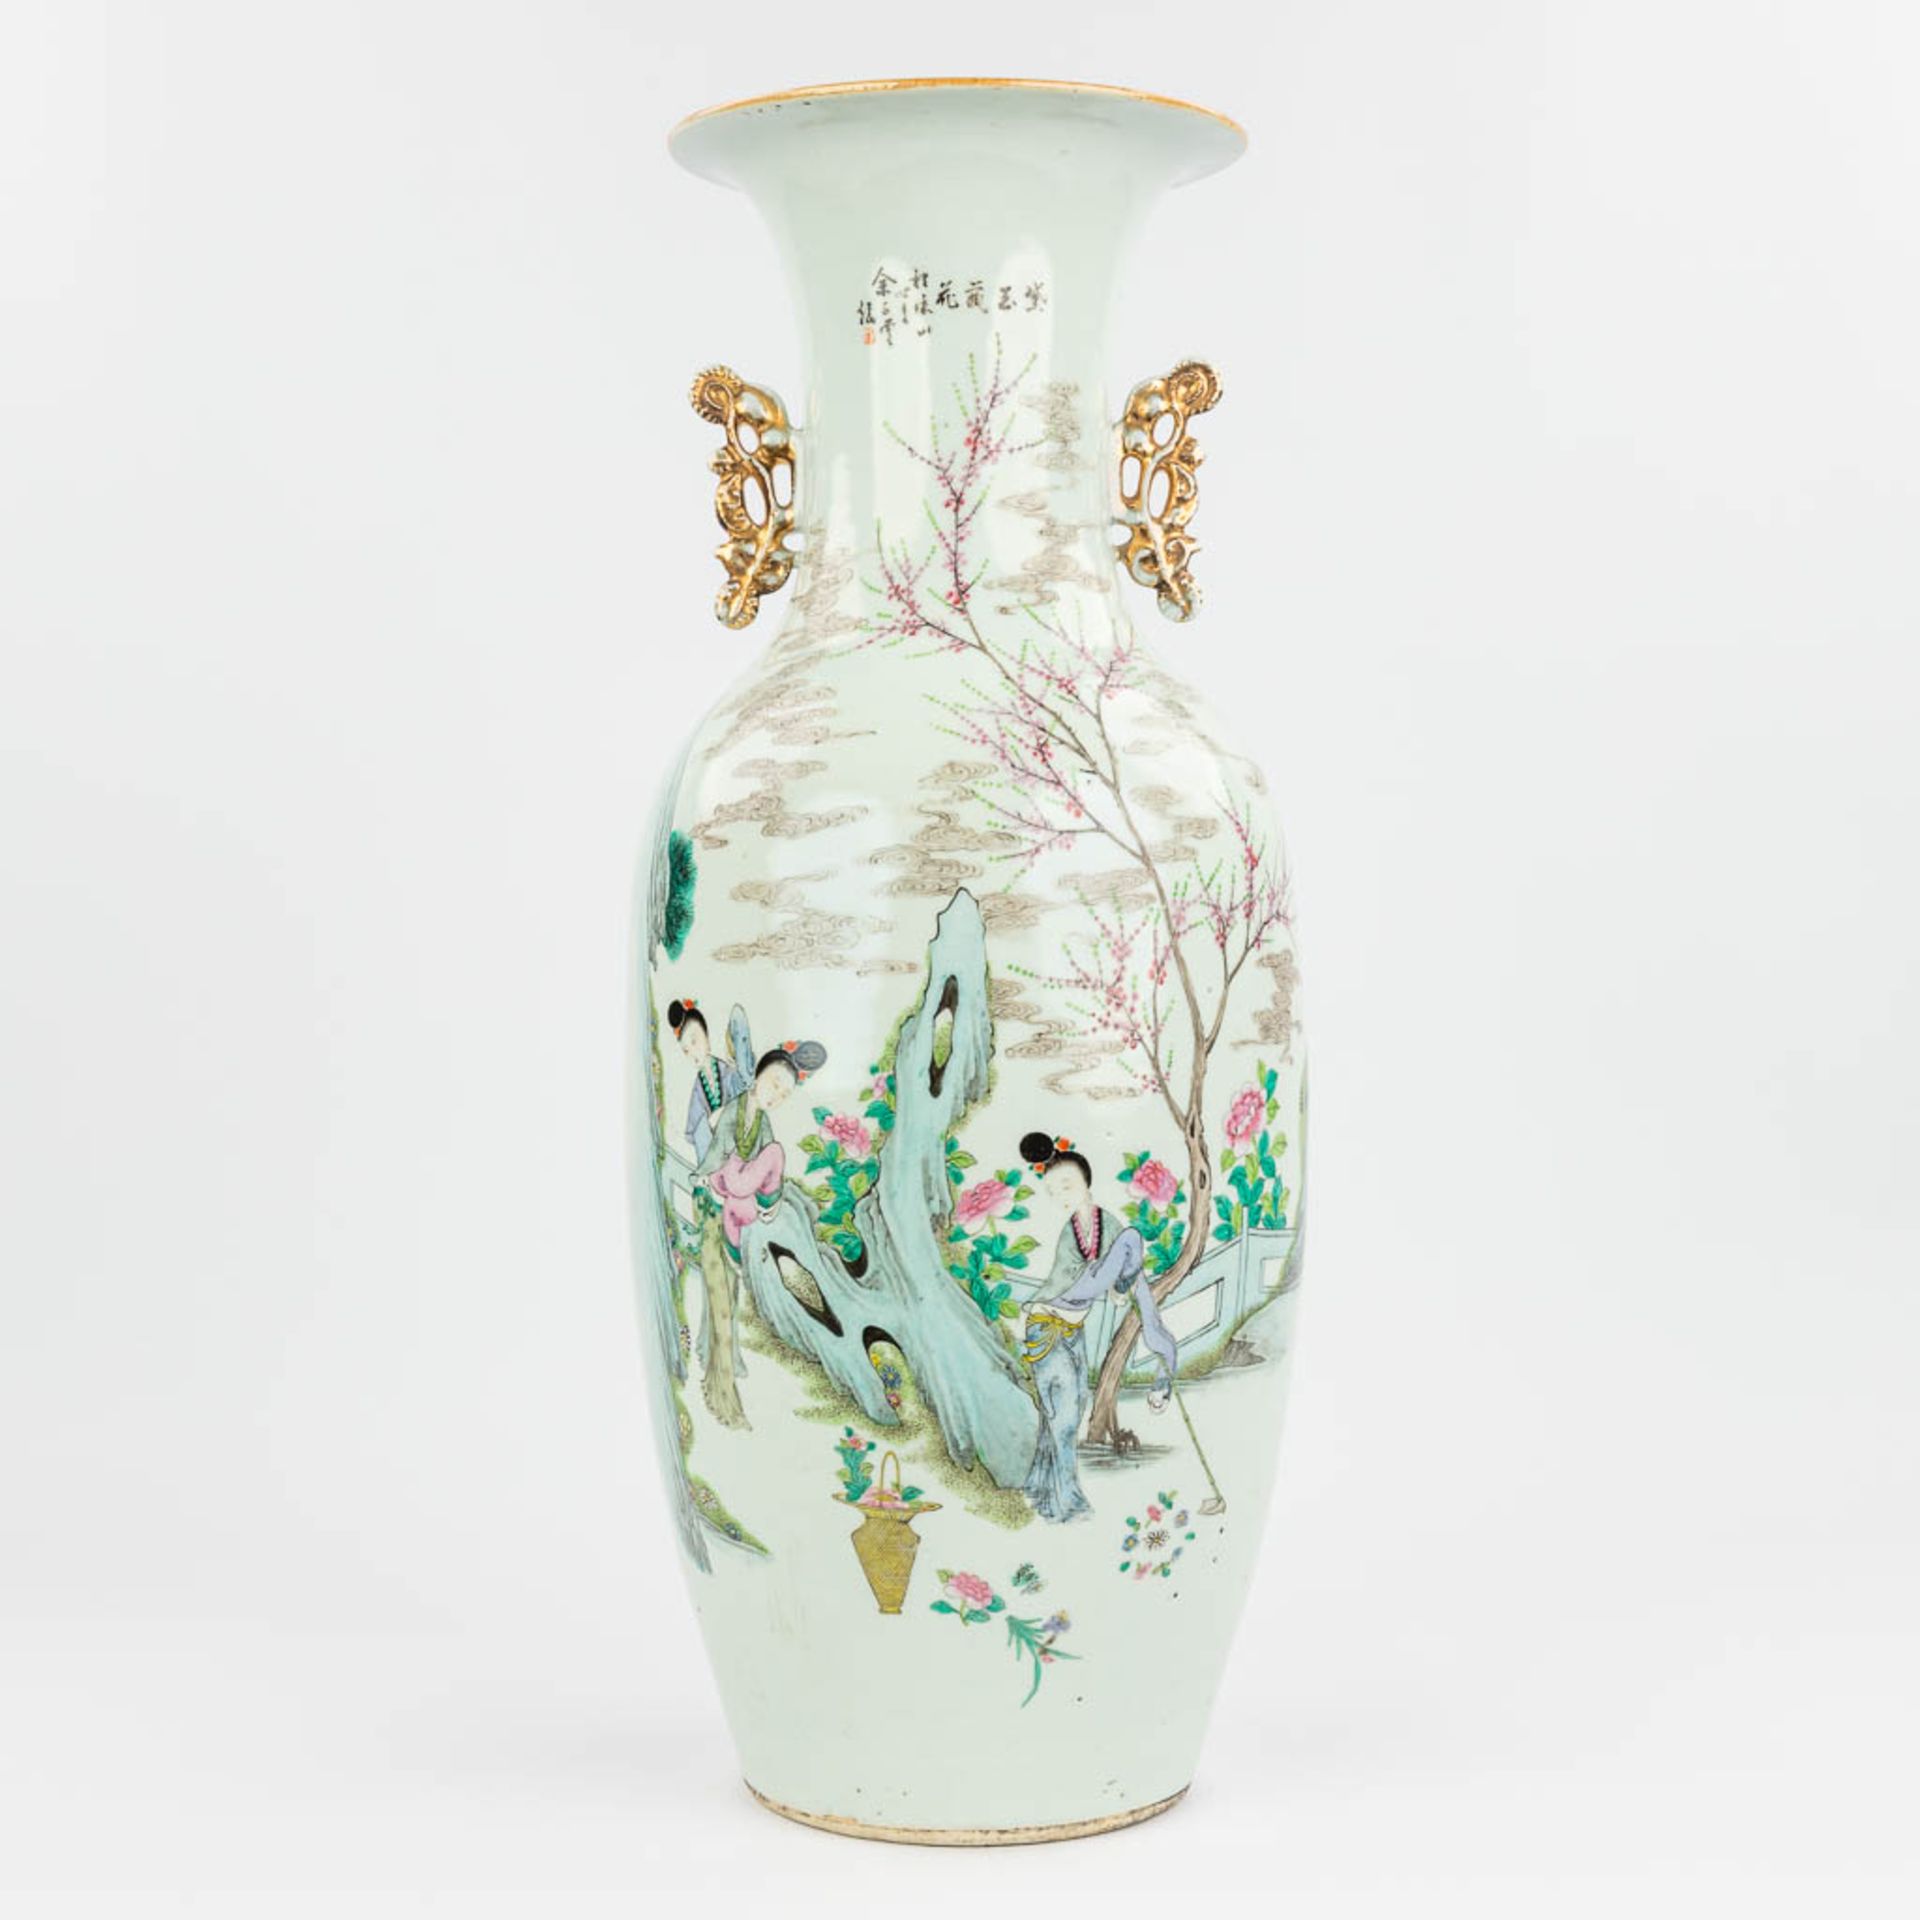 A Chinese vase made of porcelain andÊdecor of ladies near a large rock. (57,5 x 23 cm)